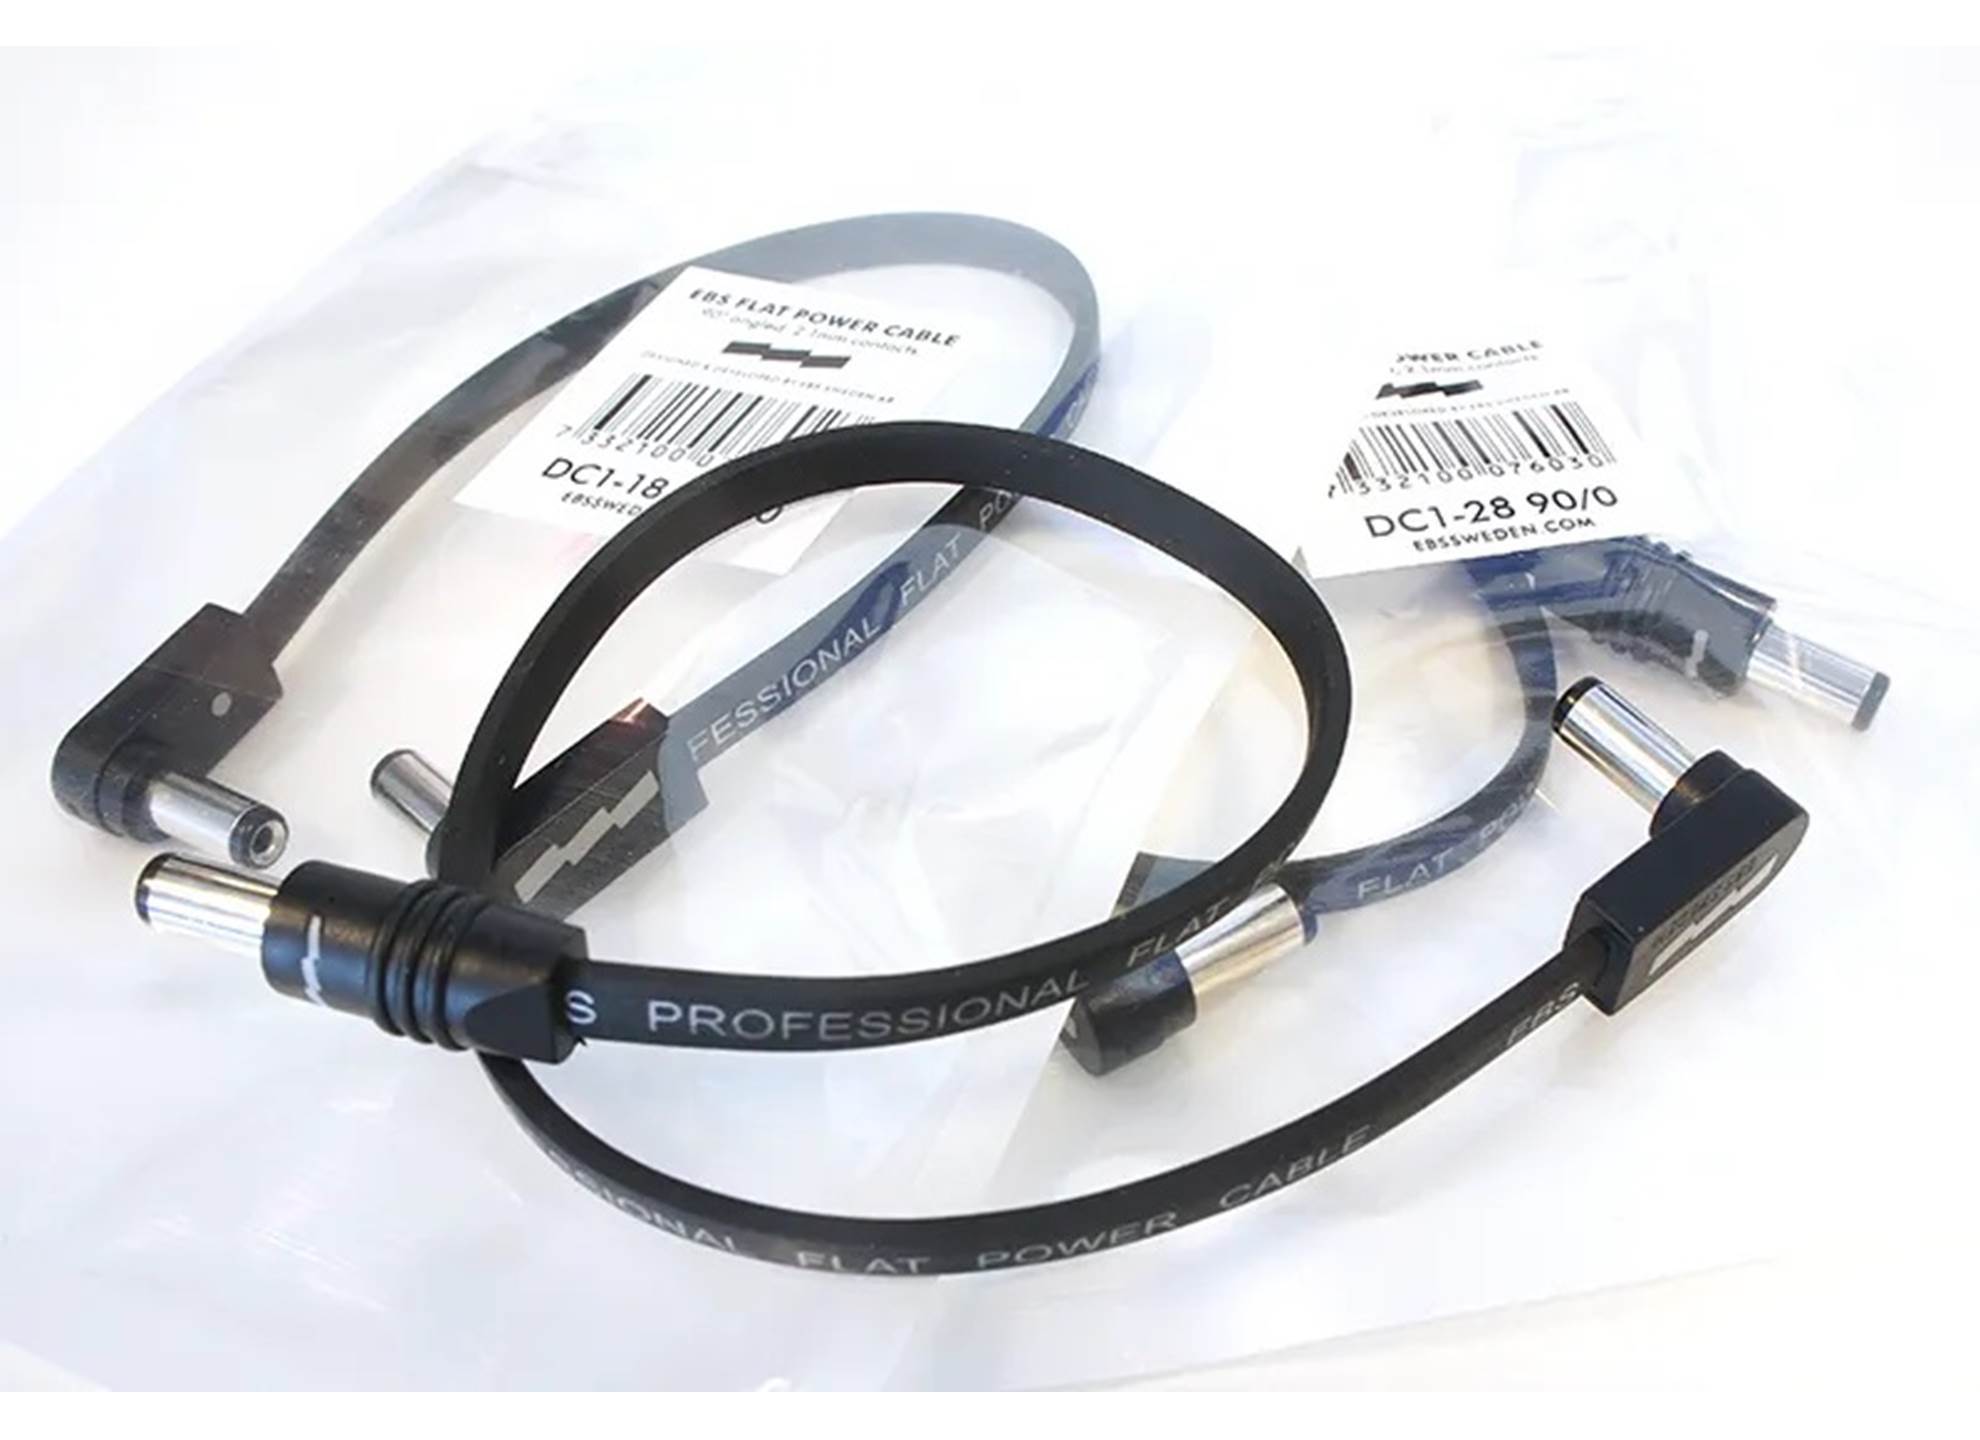 DC1-48 90/0 Flat Power Cable 48 cm